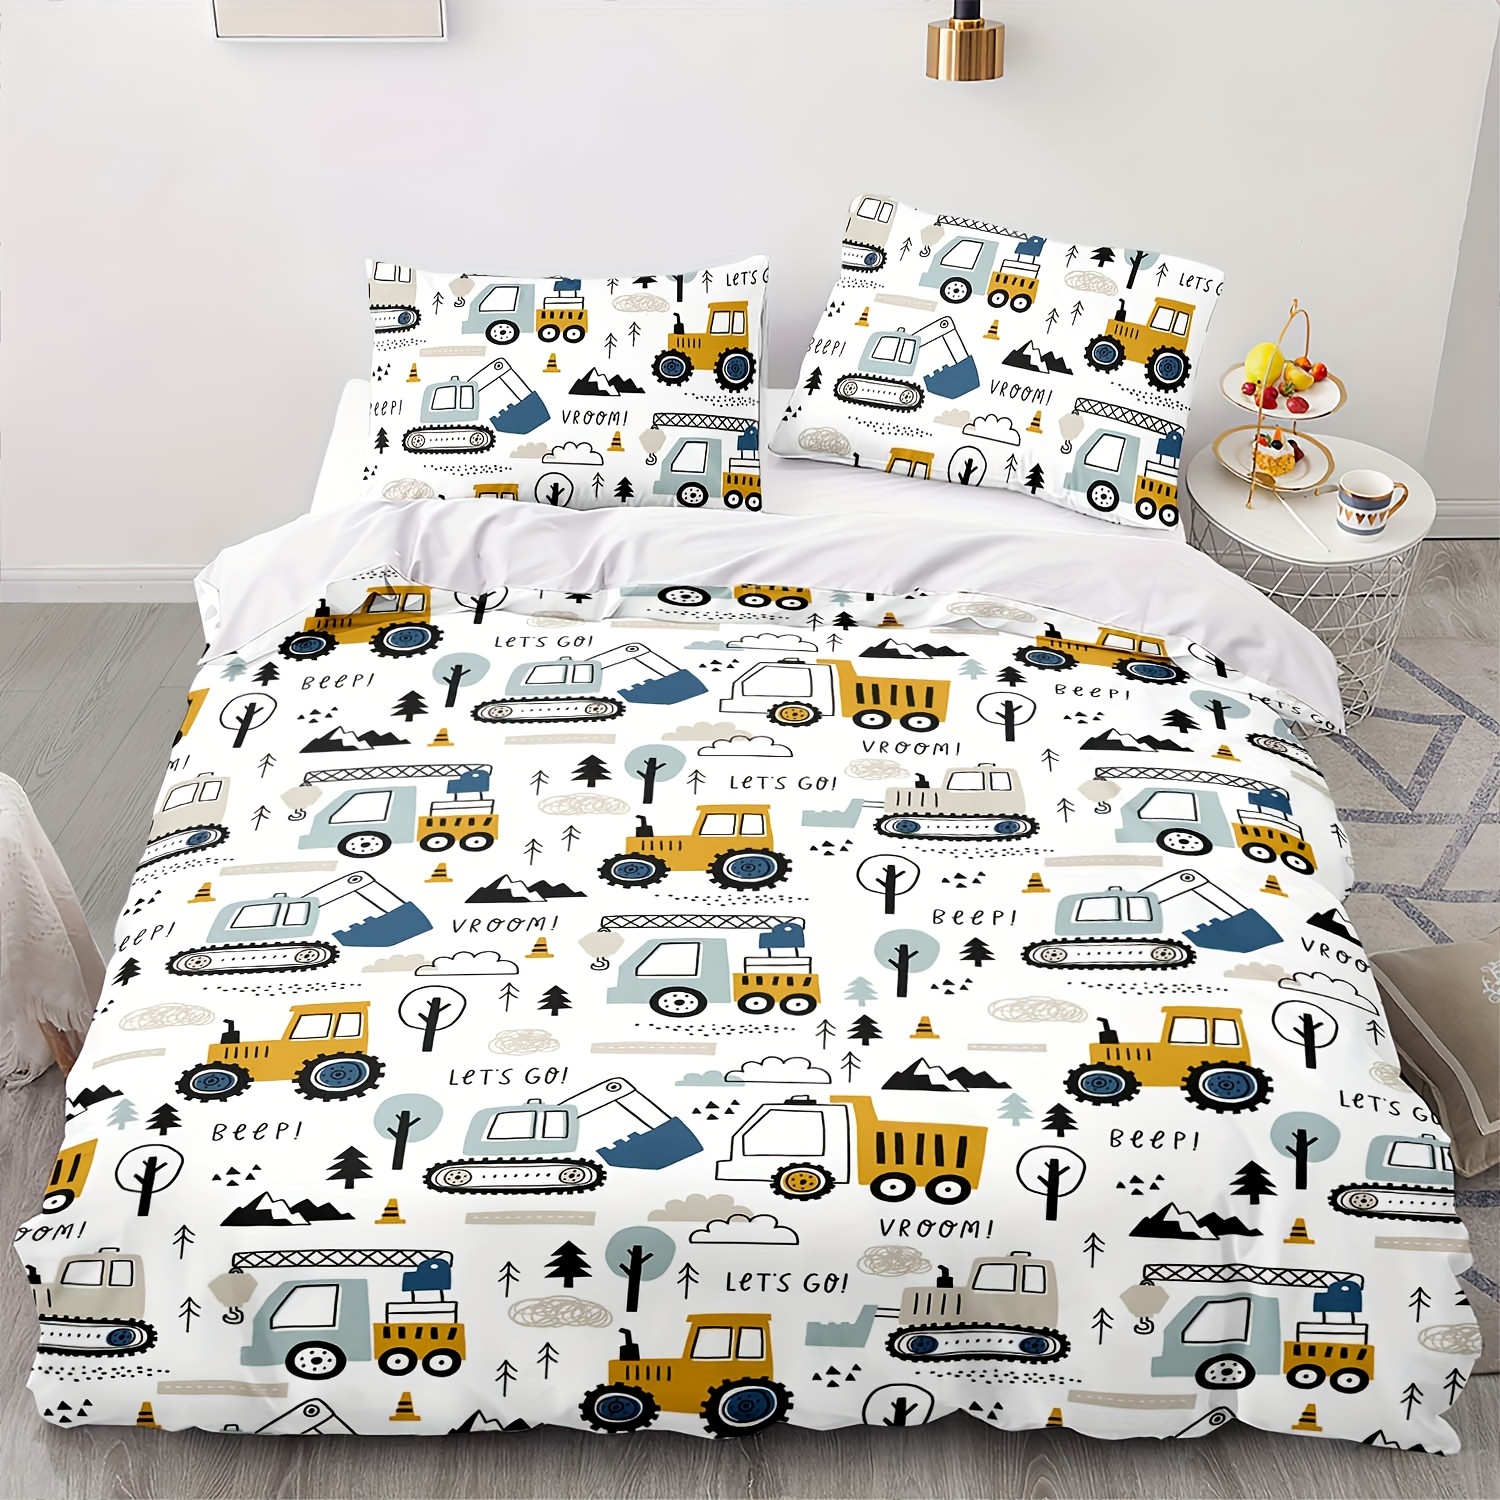 

2/3pcs Duvet Cover Set (1*duvet Cover + 1/2*pillowcase, Without Core), Printed Bedding Set, Soft Comfortable And Skin-frinendly Duvet Cover, For Bedroom, Guest Room